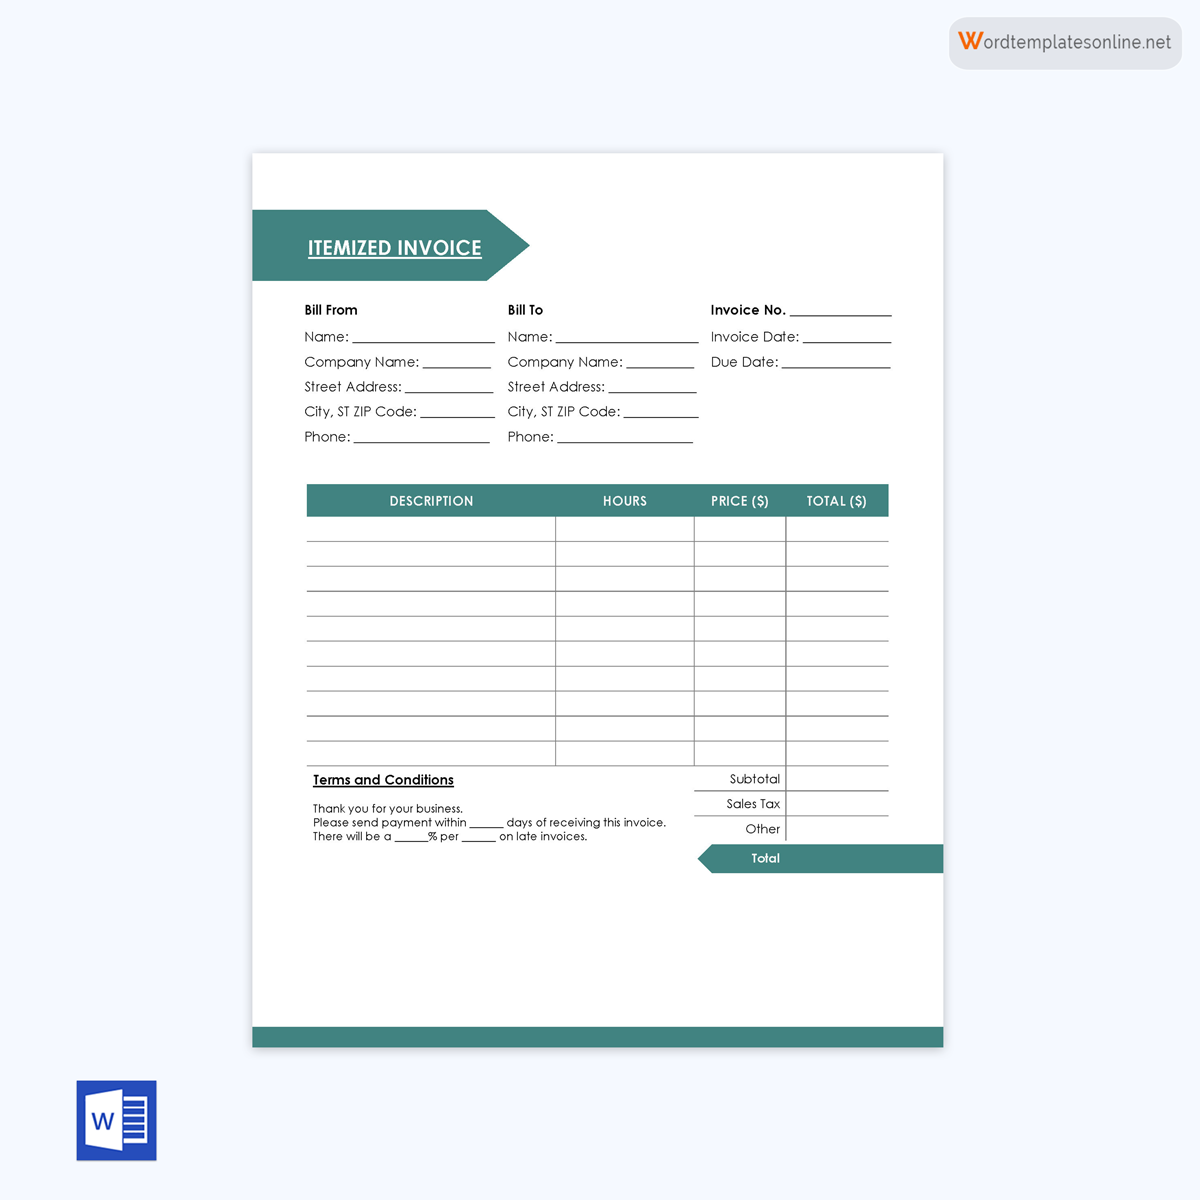 Sample Itemized Receipt Template for Free